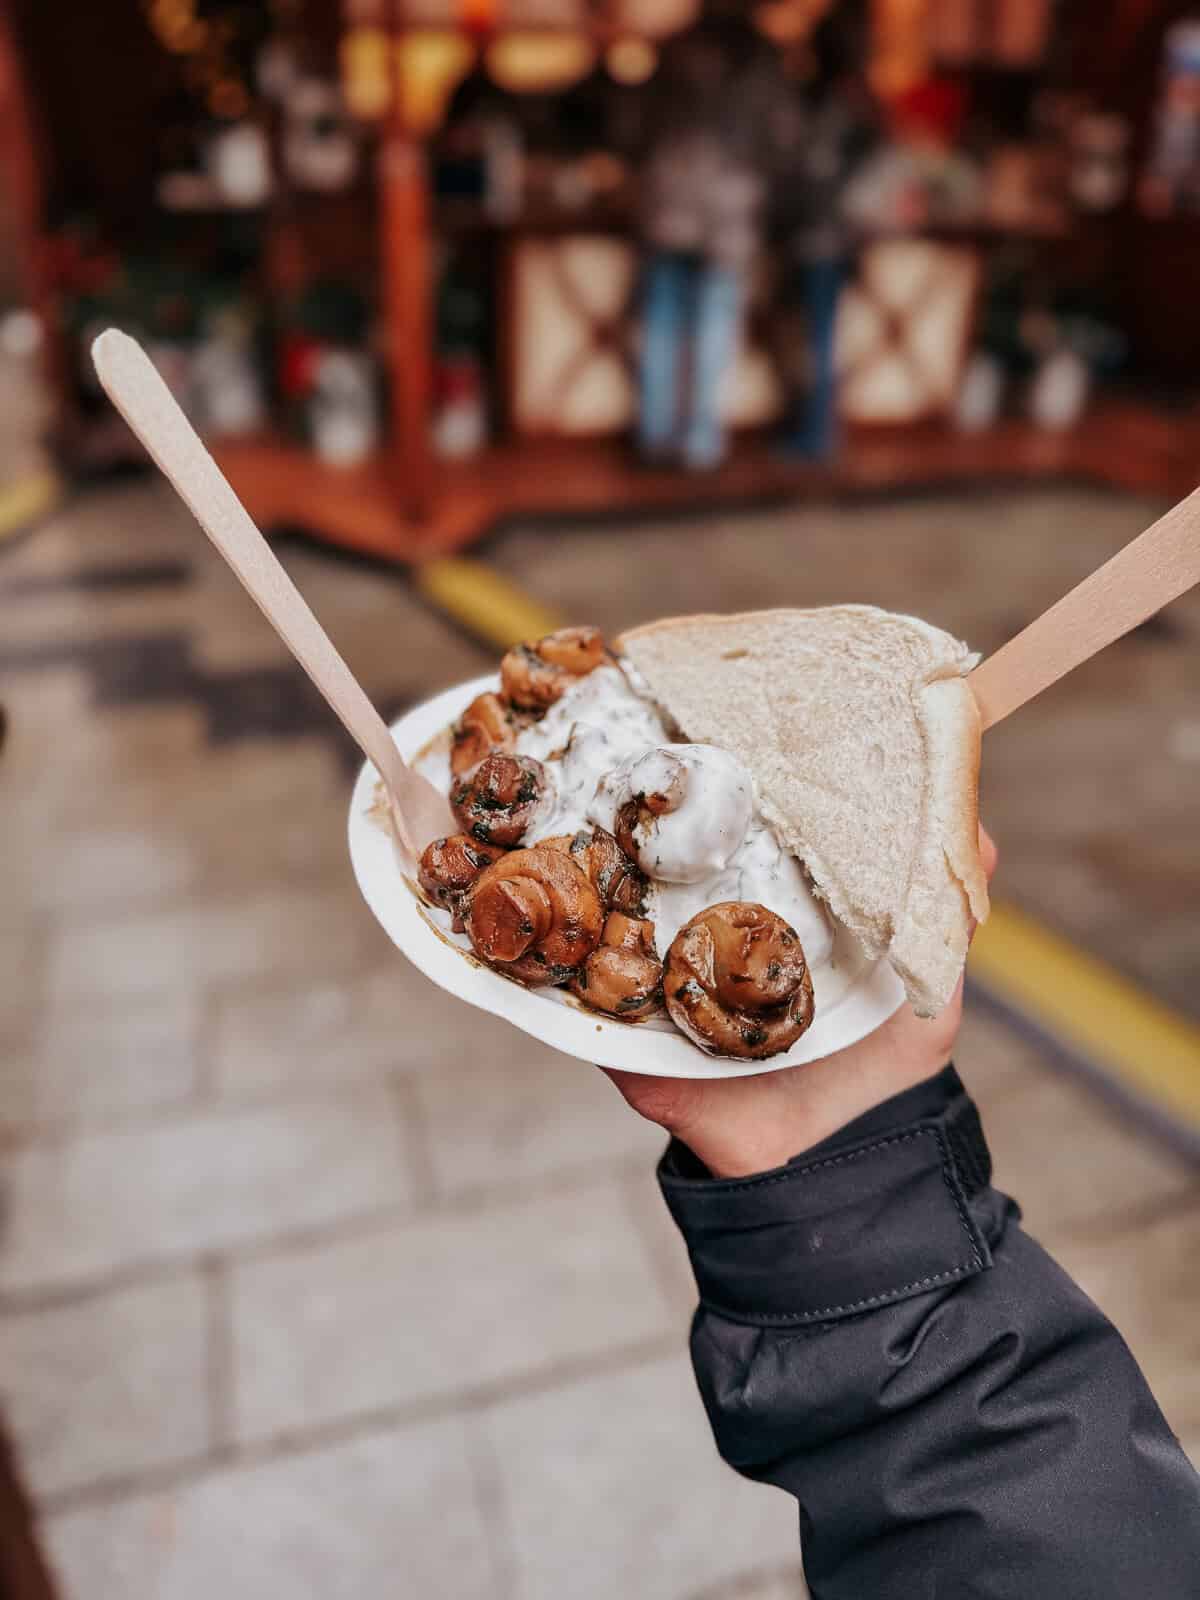 A hand holding a plate with roasted mushrooms topped with a creamy sauce served on a slice of bread, with street market stalls in the background